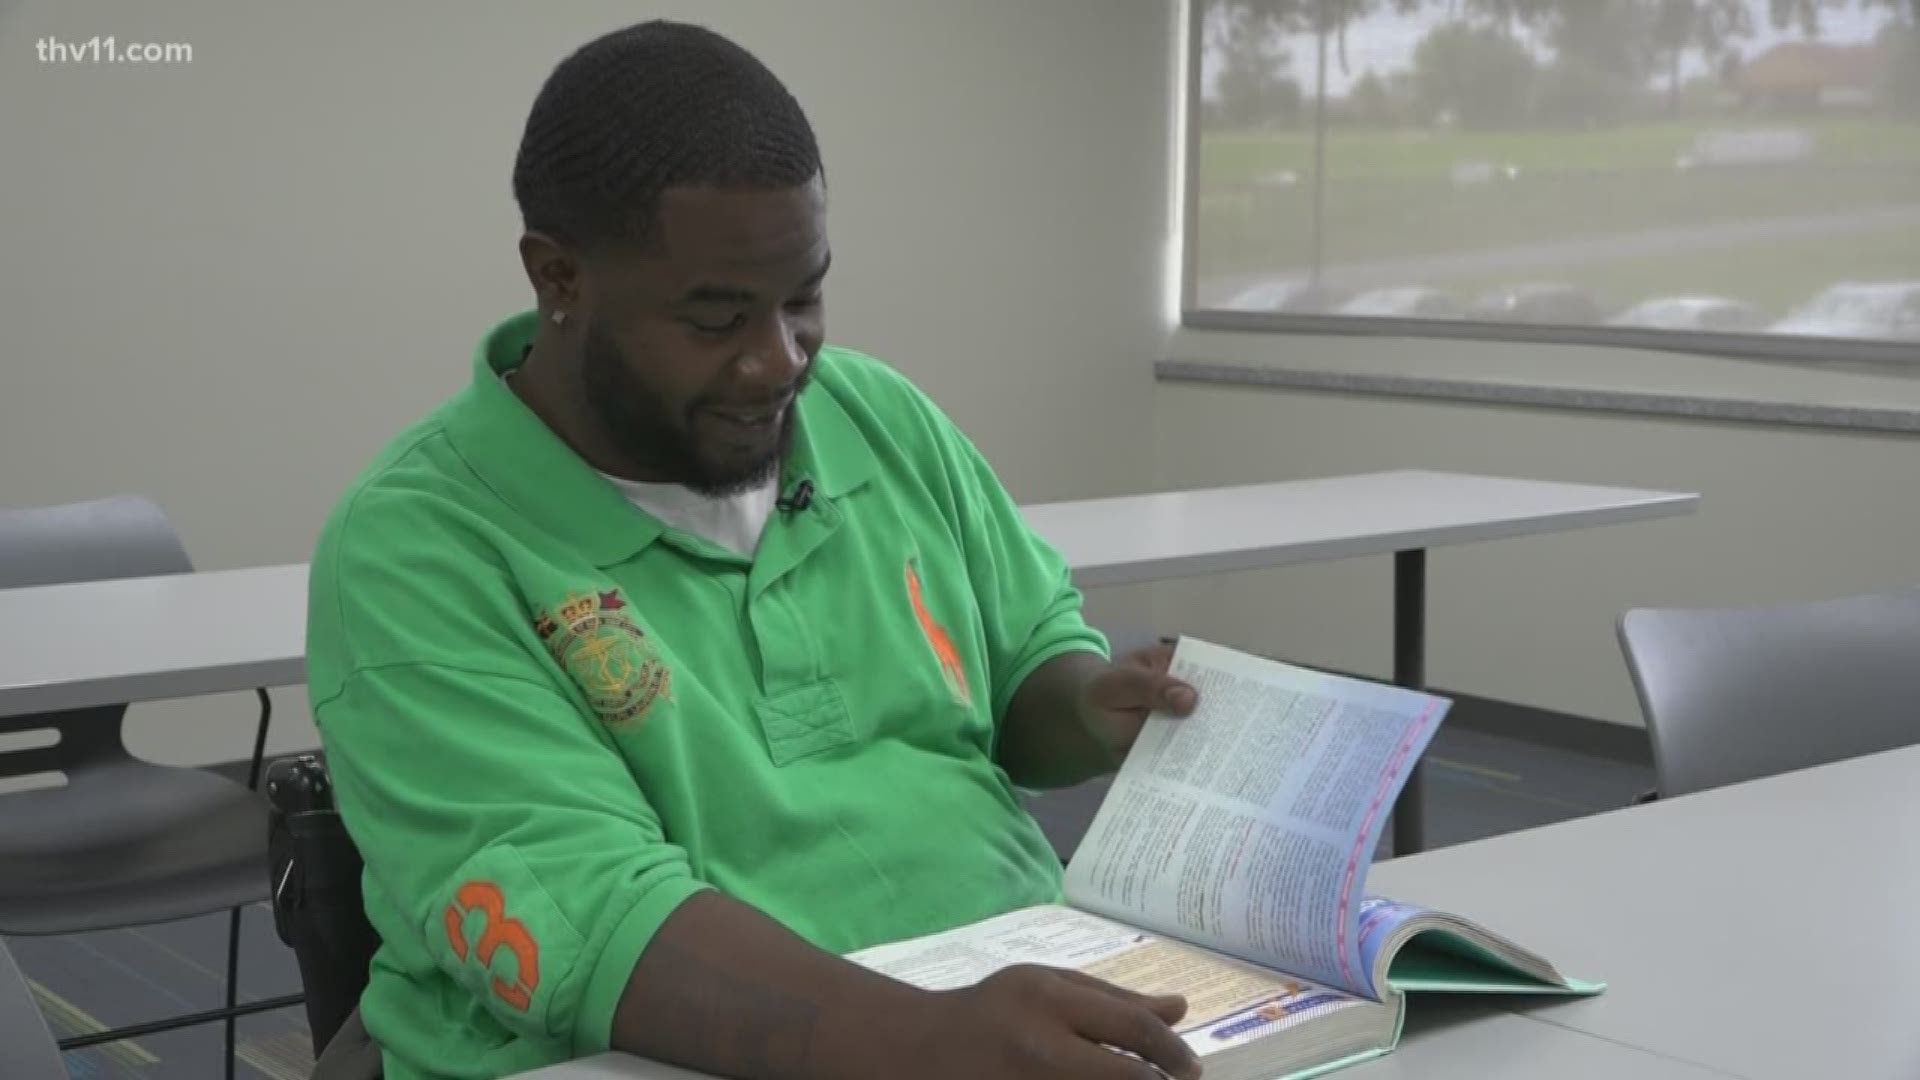 18 men and women in Little Rock will fulfill their dream, obtaining their high school diploma. It's all thanks to The Excel Center, the state's first high school for adults. One of those students made an unlikely move from a life of gangs to graduation.